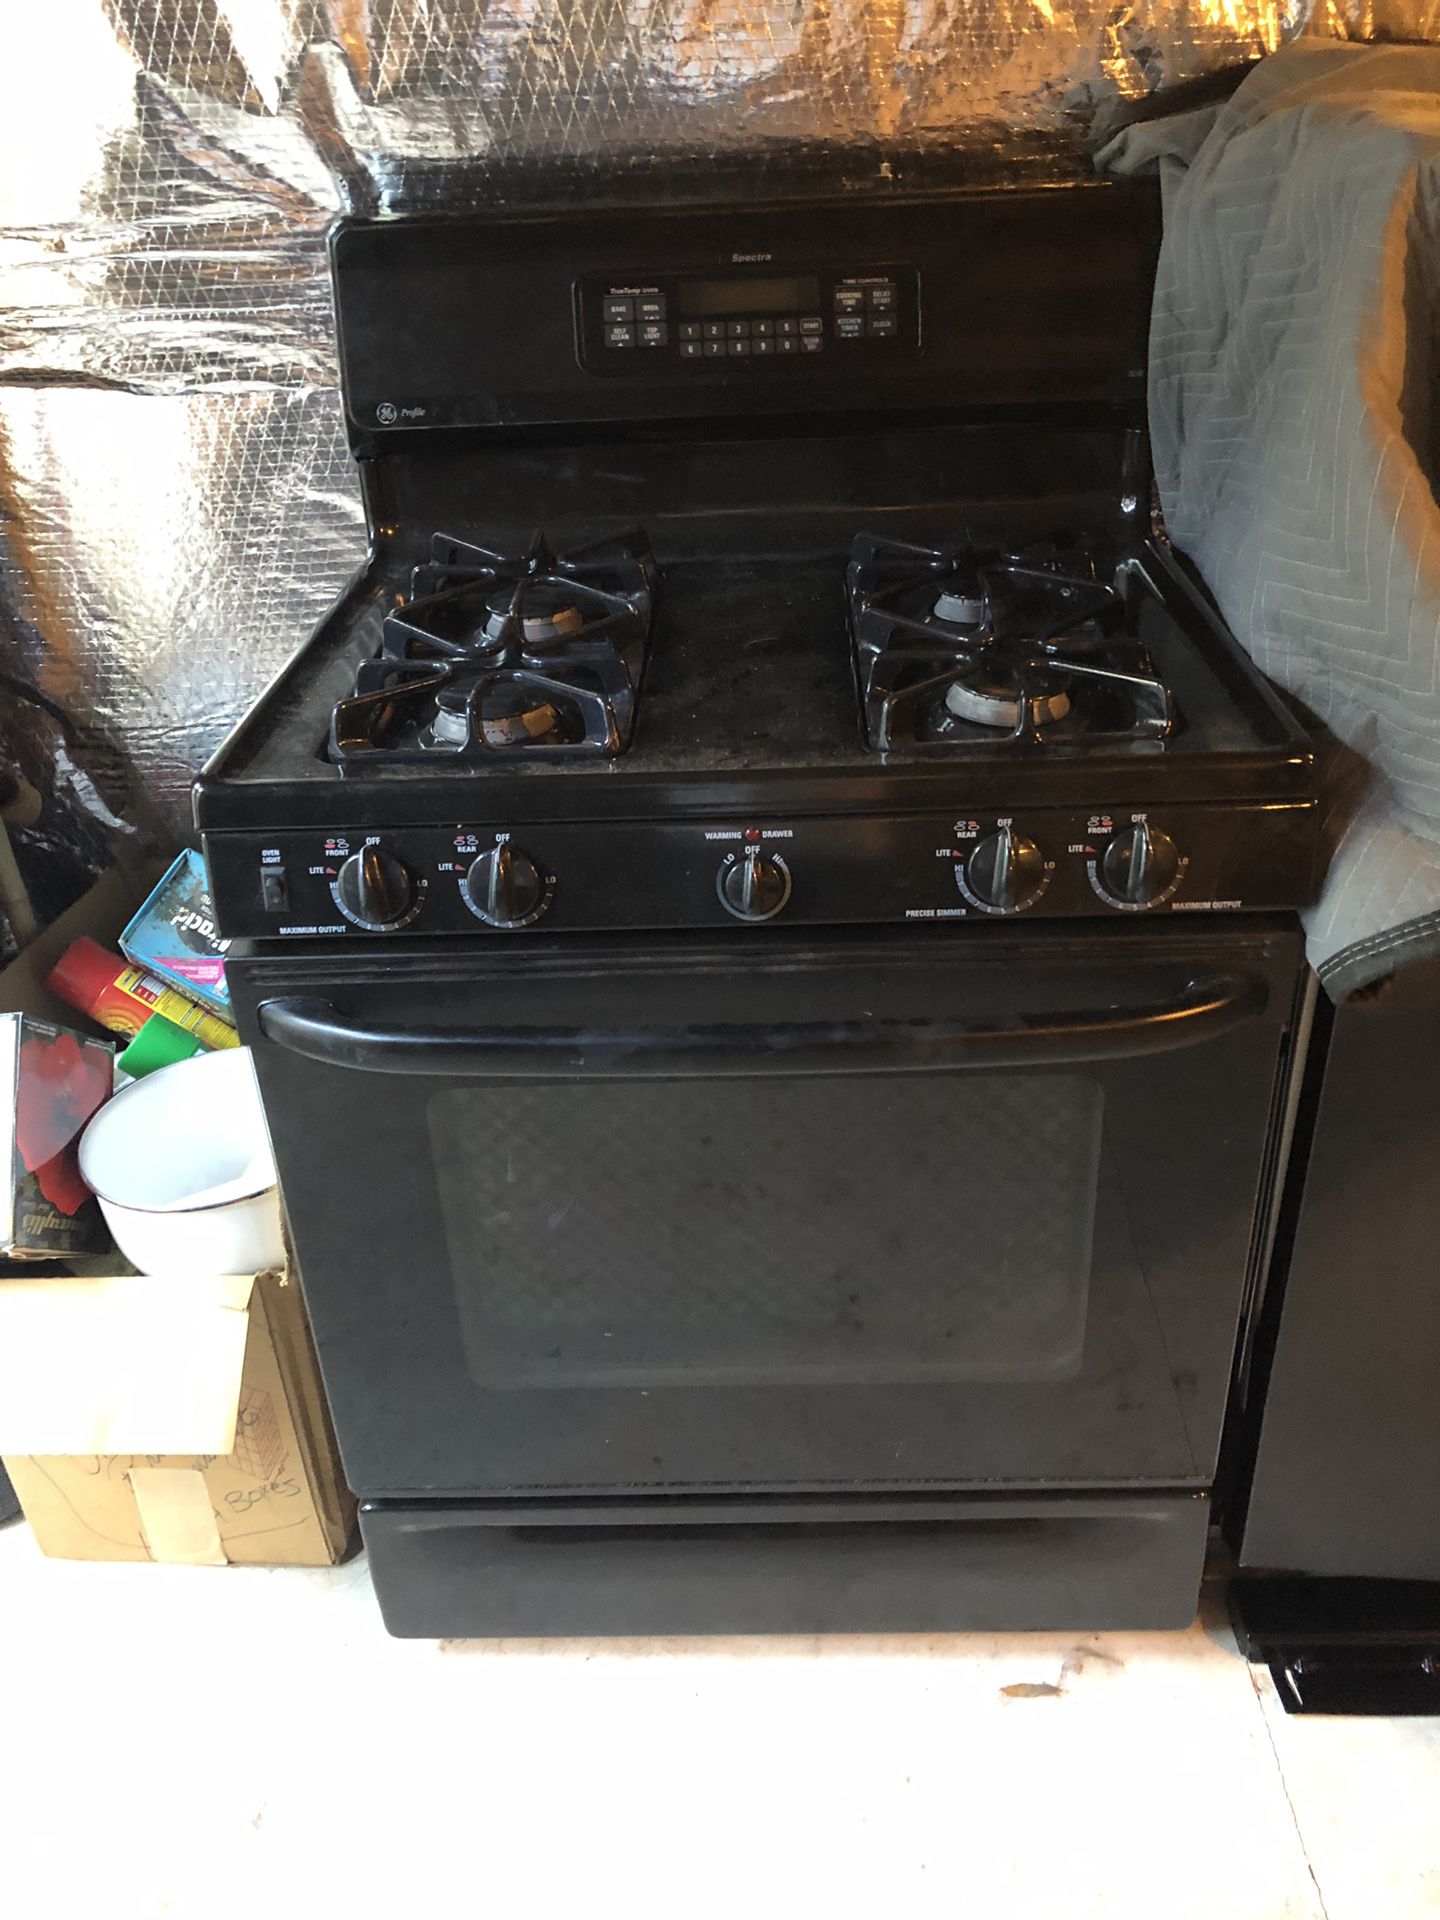 Gas oven stove